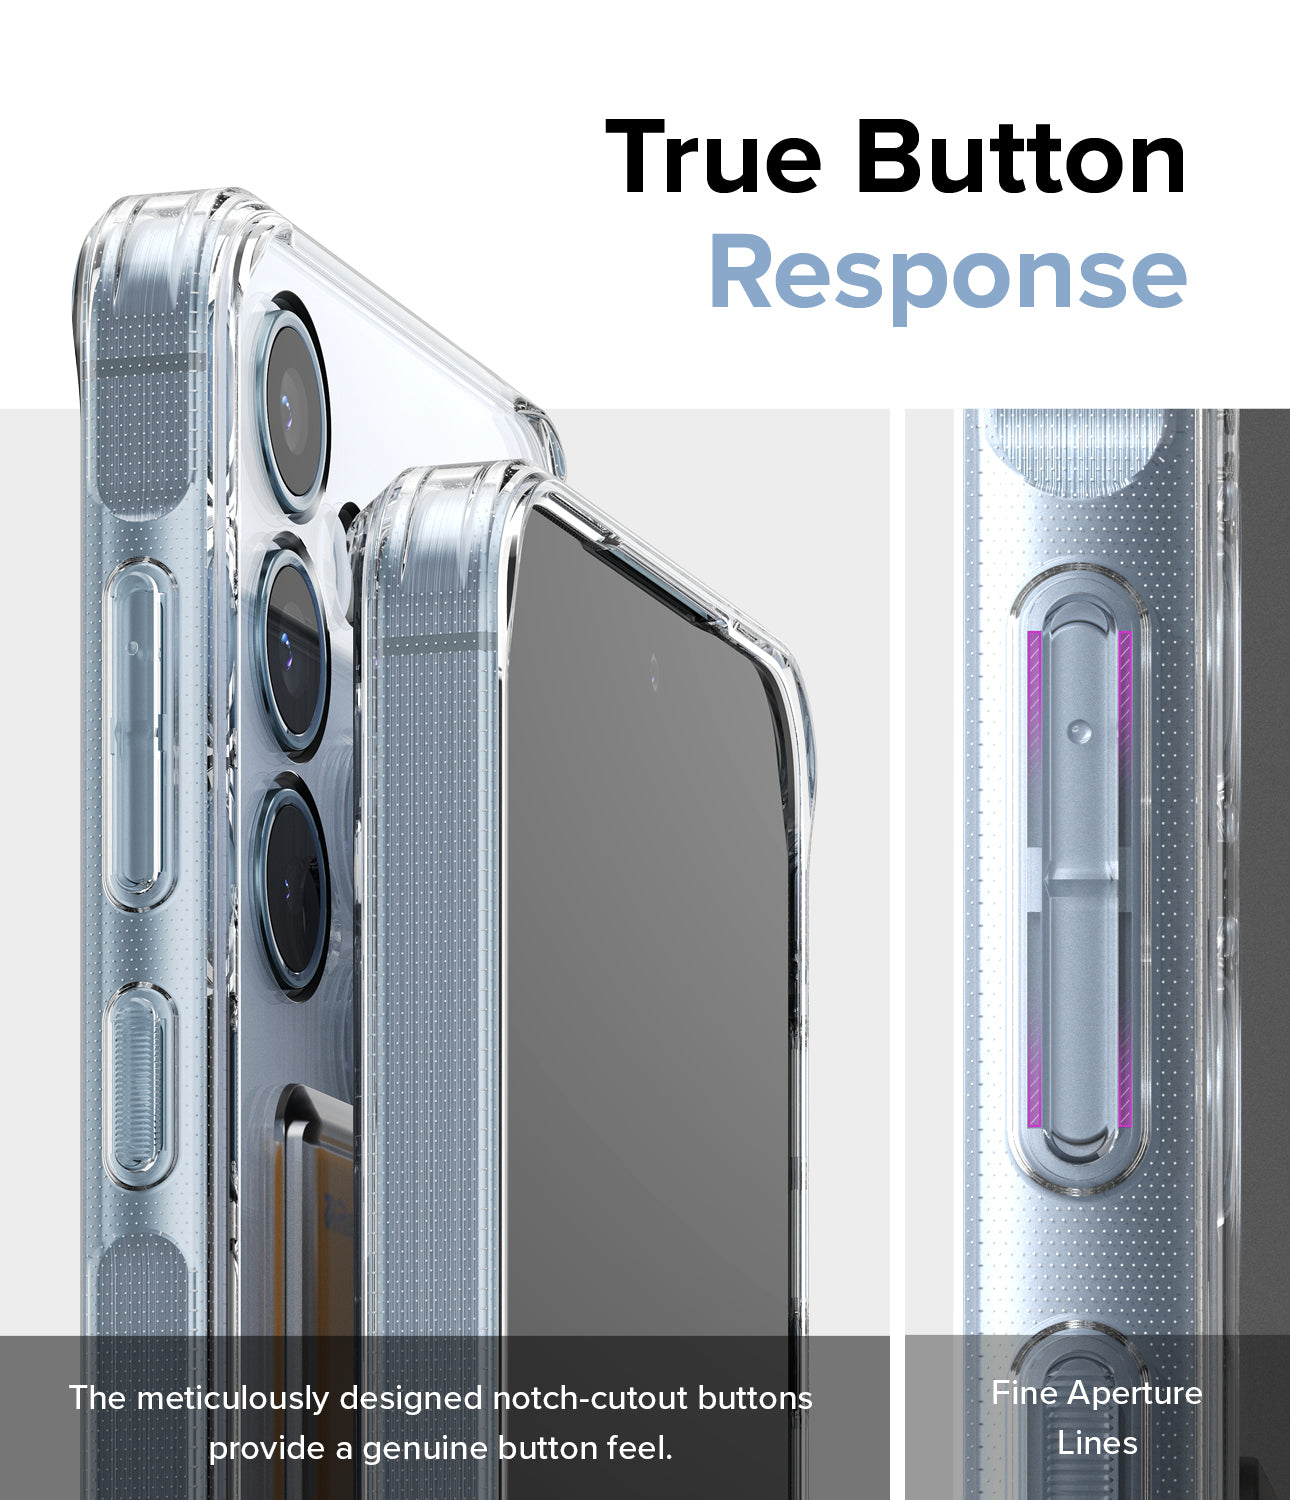 Galaxy A55 Case | Fusion Card - True Button Response. The meticulously designed notch-cutout buttons provide a genuine button feel. Fine Aperture Lines.